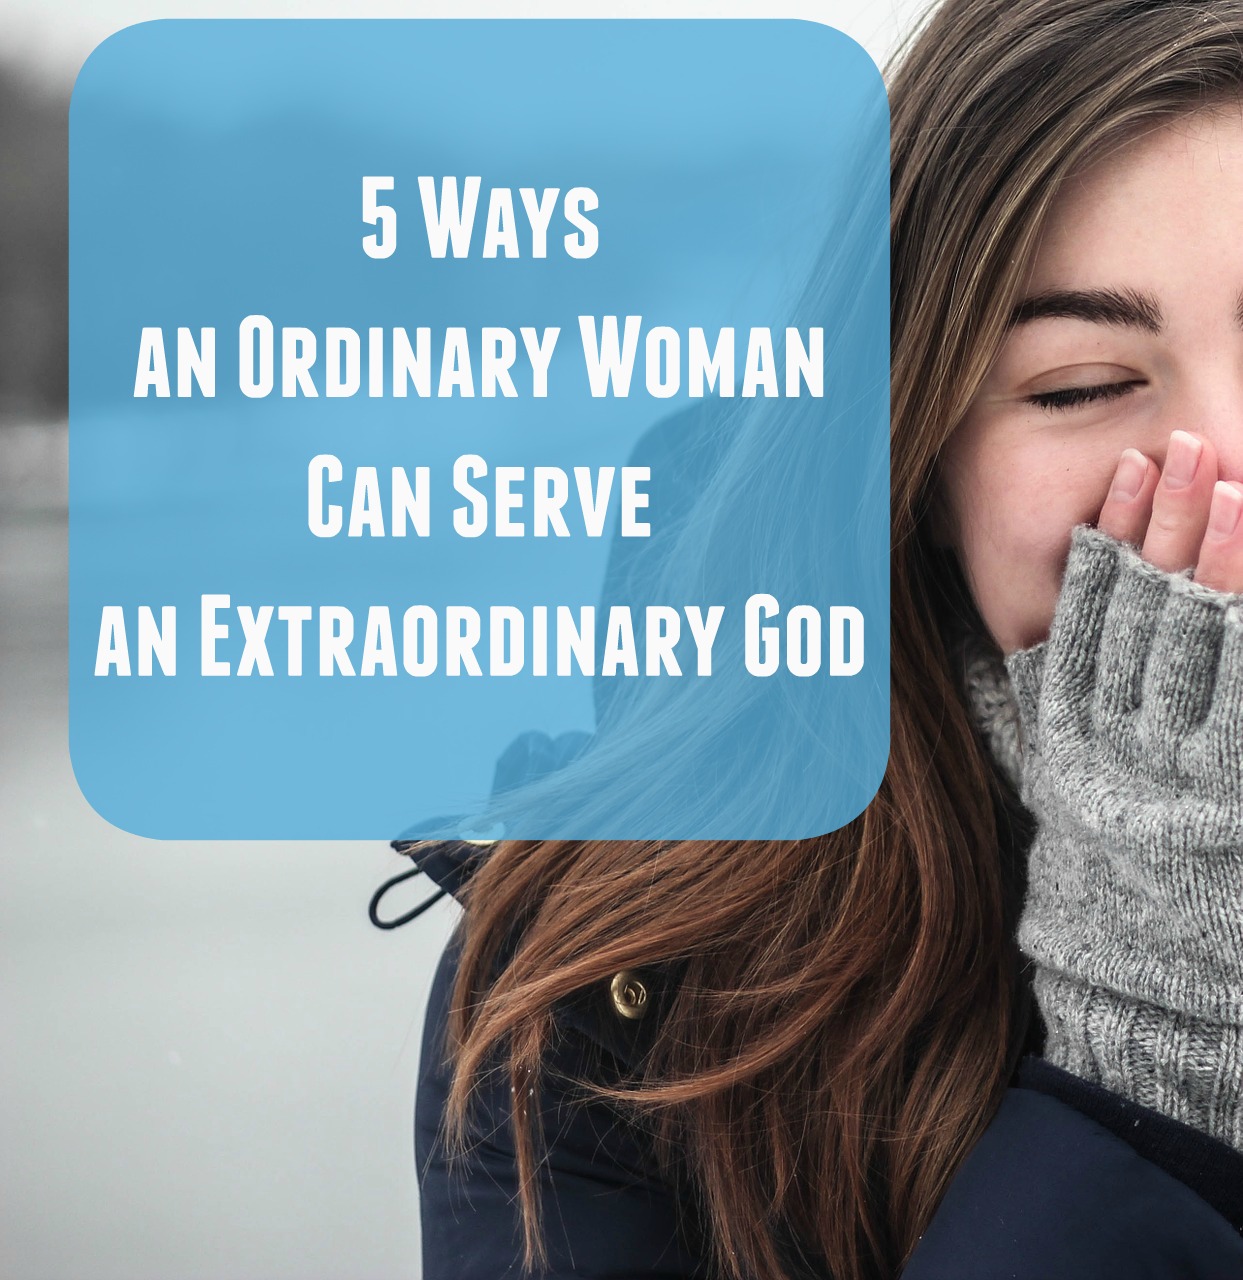 5 Ways an Ordinary Woman can Serve an Extraordinary God | 3dlessons4life.com